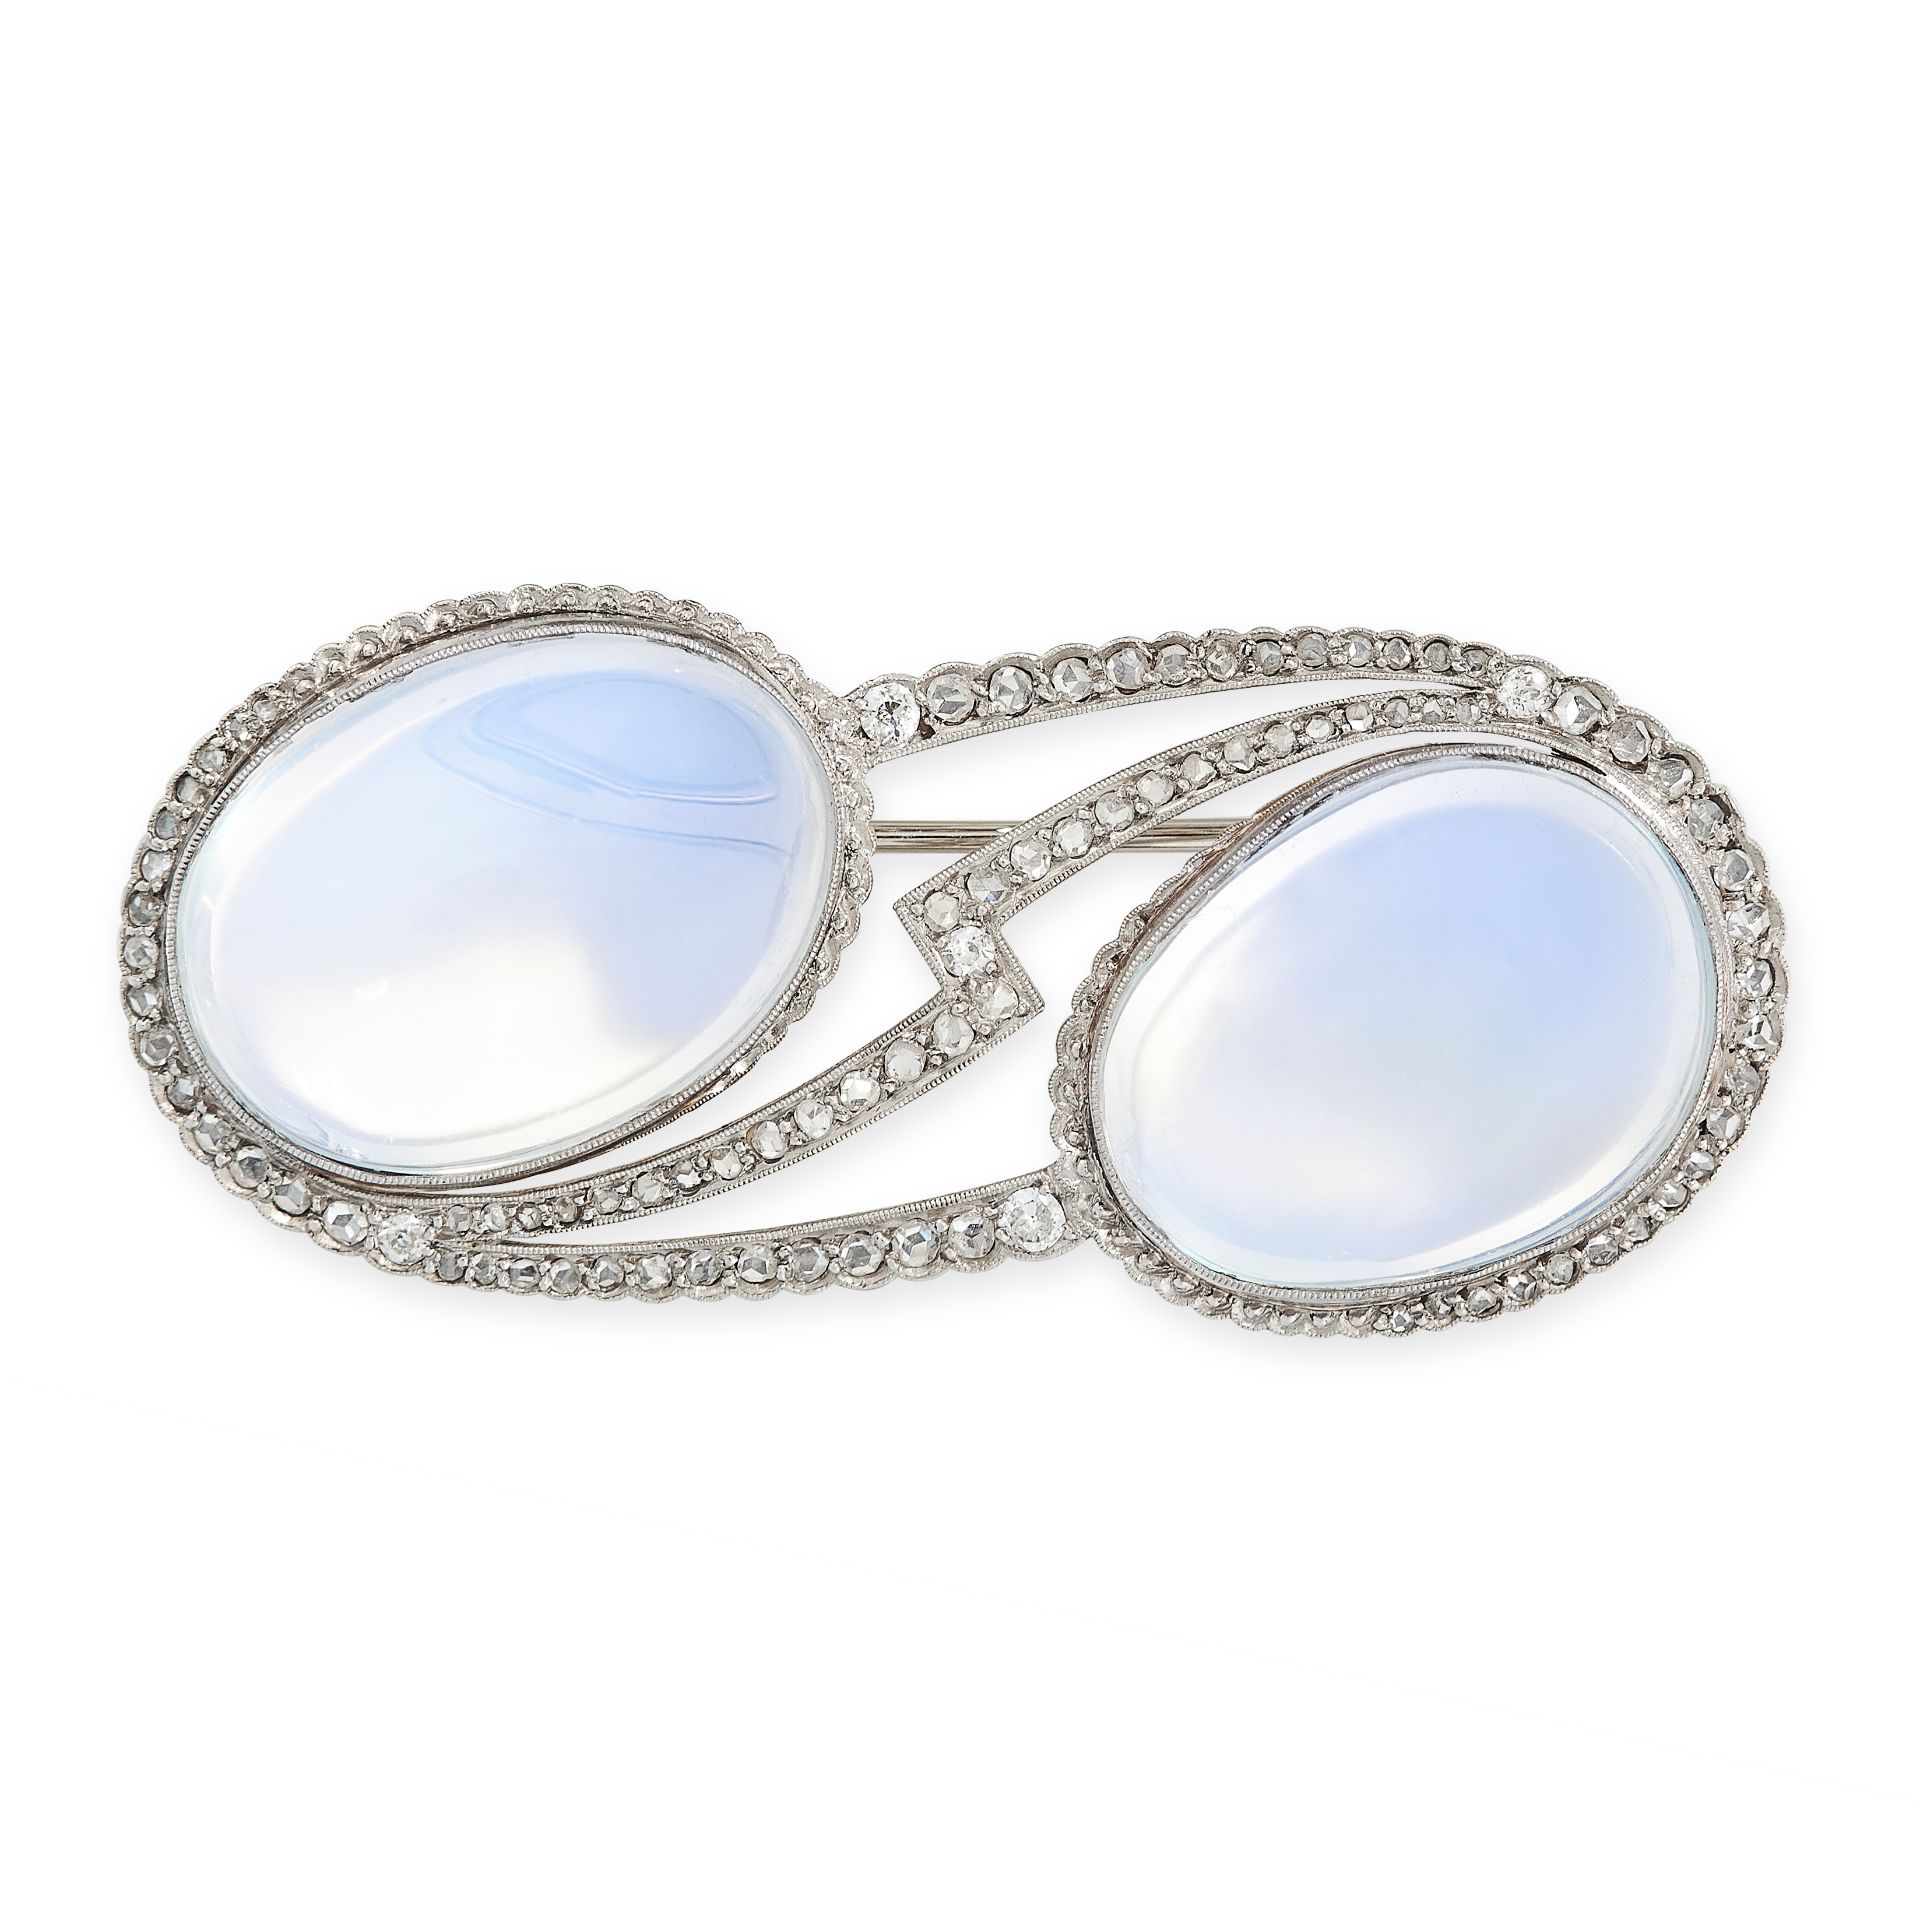 AN ART DECO MOONSTONE AND DIAMOND BROOCH set with two large oval cabochon moonstones, within an